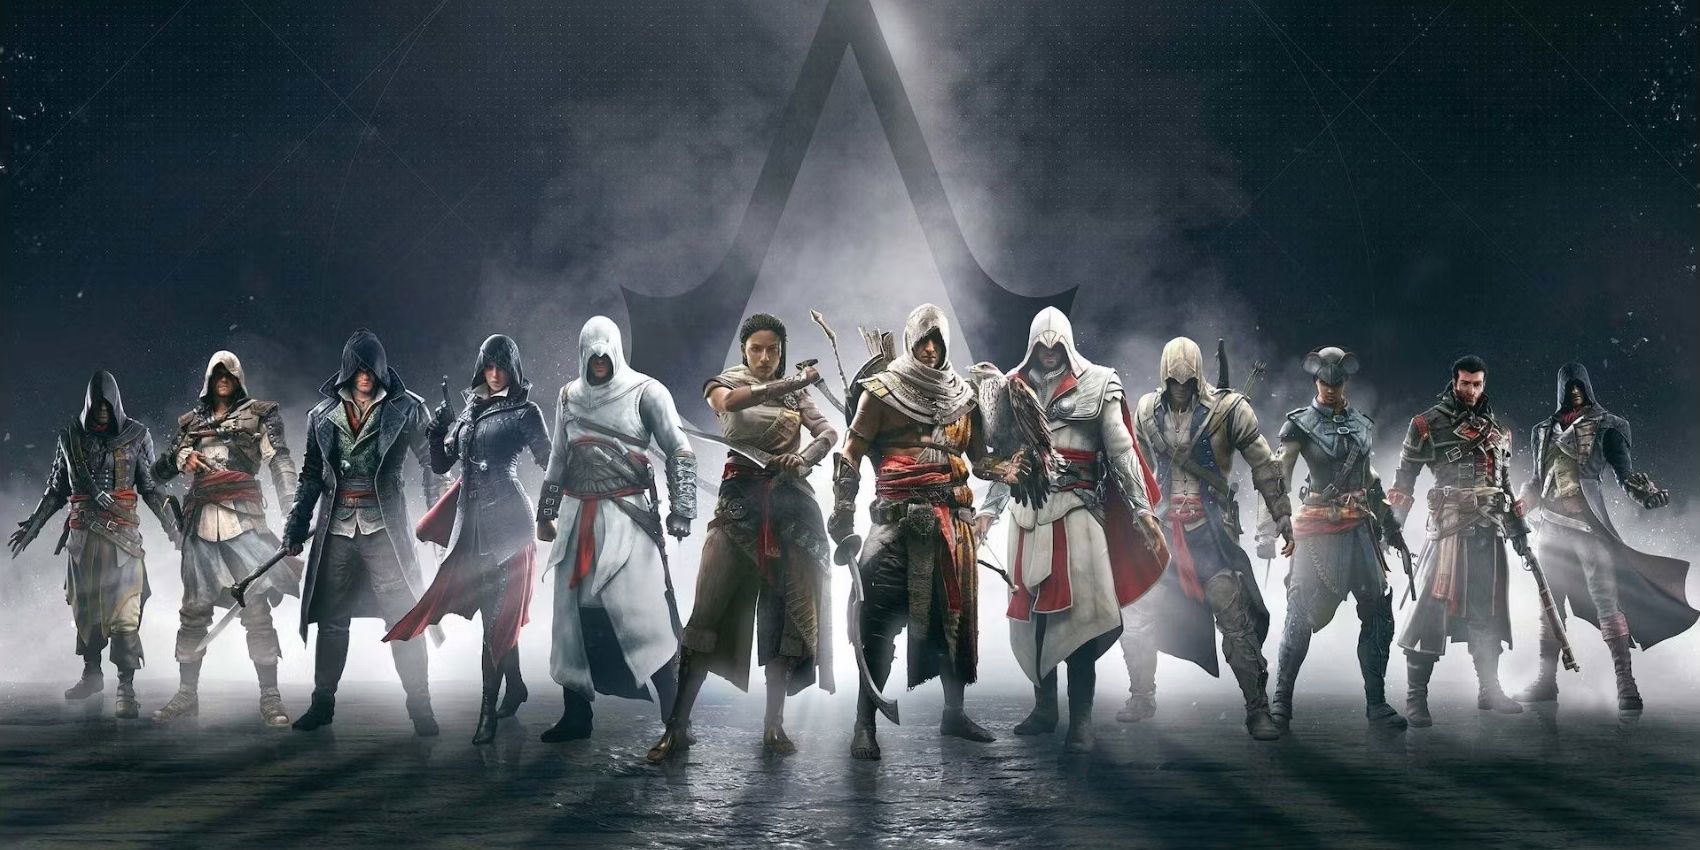 Ranking All The Assassin's Creed Games